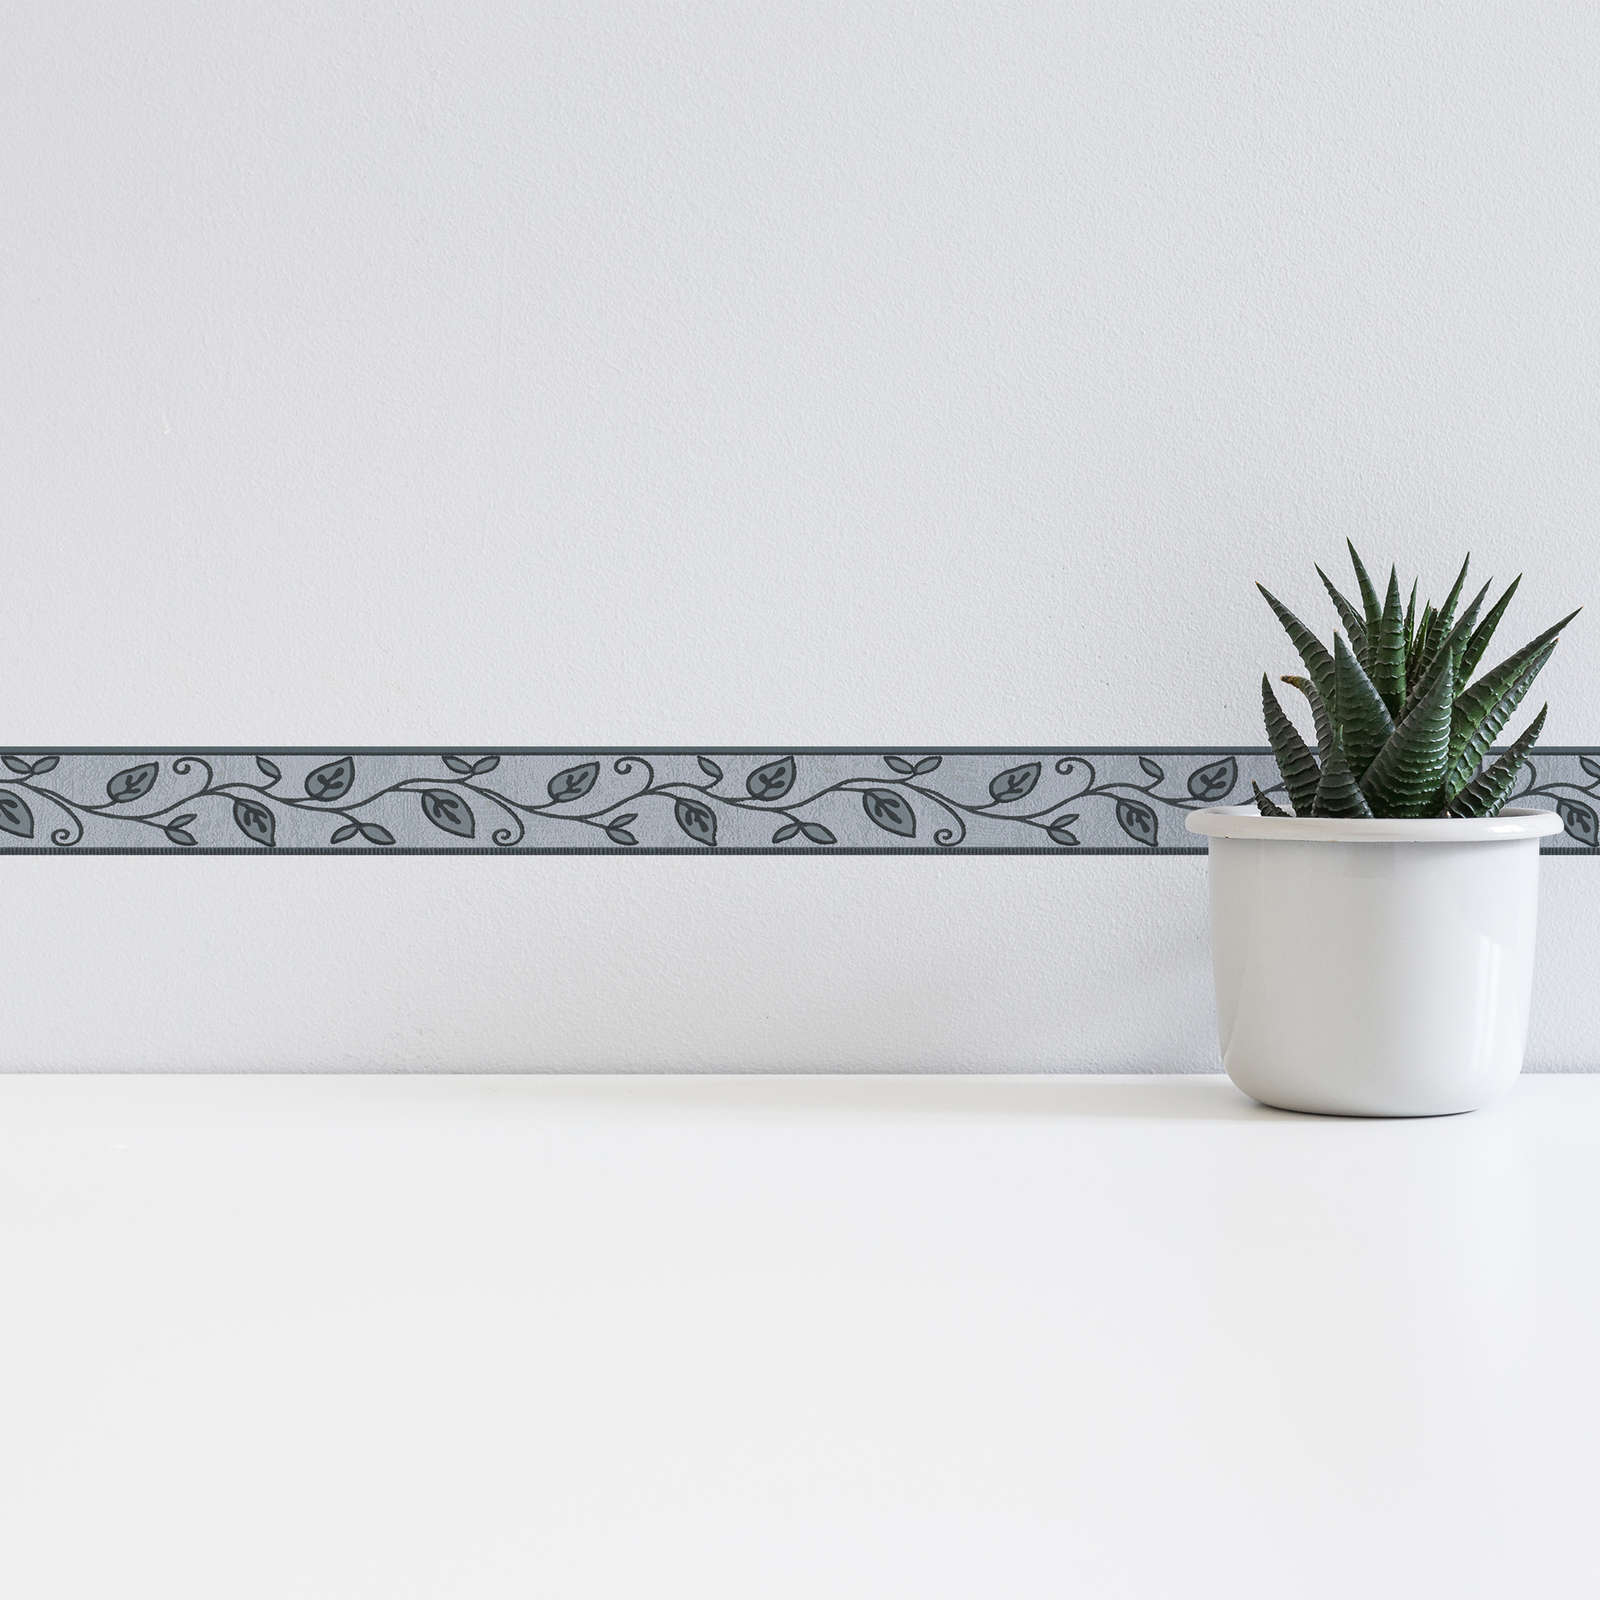             Border with leaf tendrils and textured pattern - Black, Grey
        